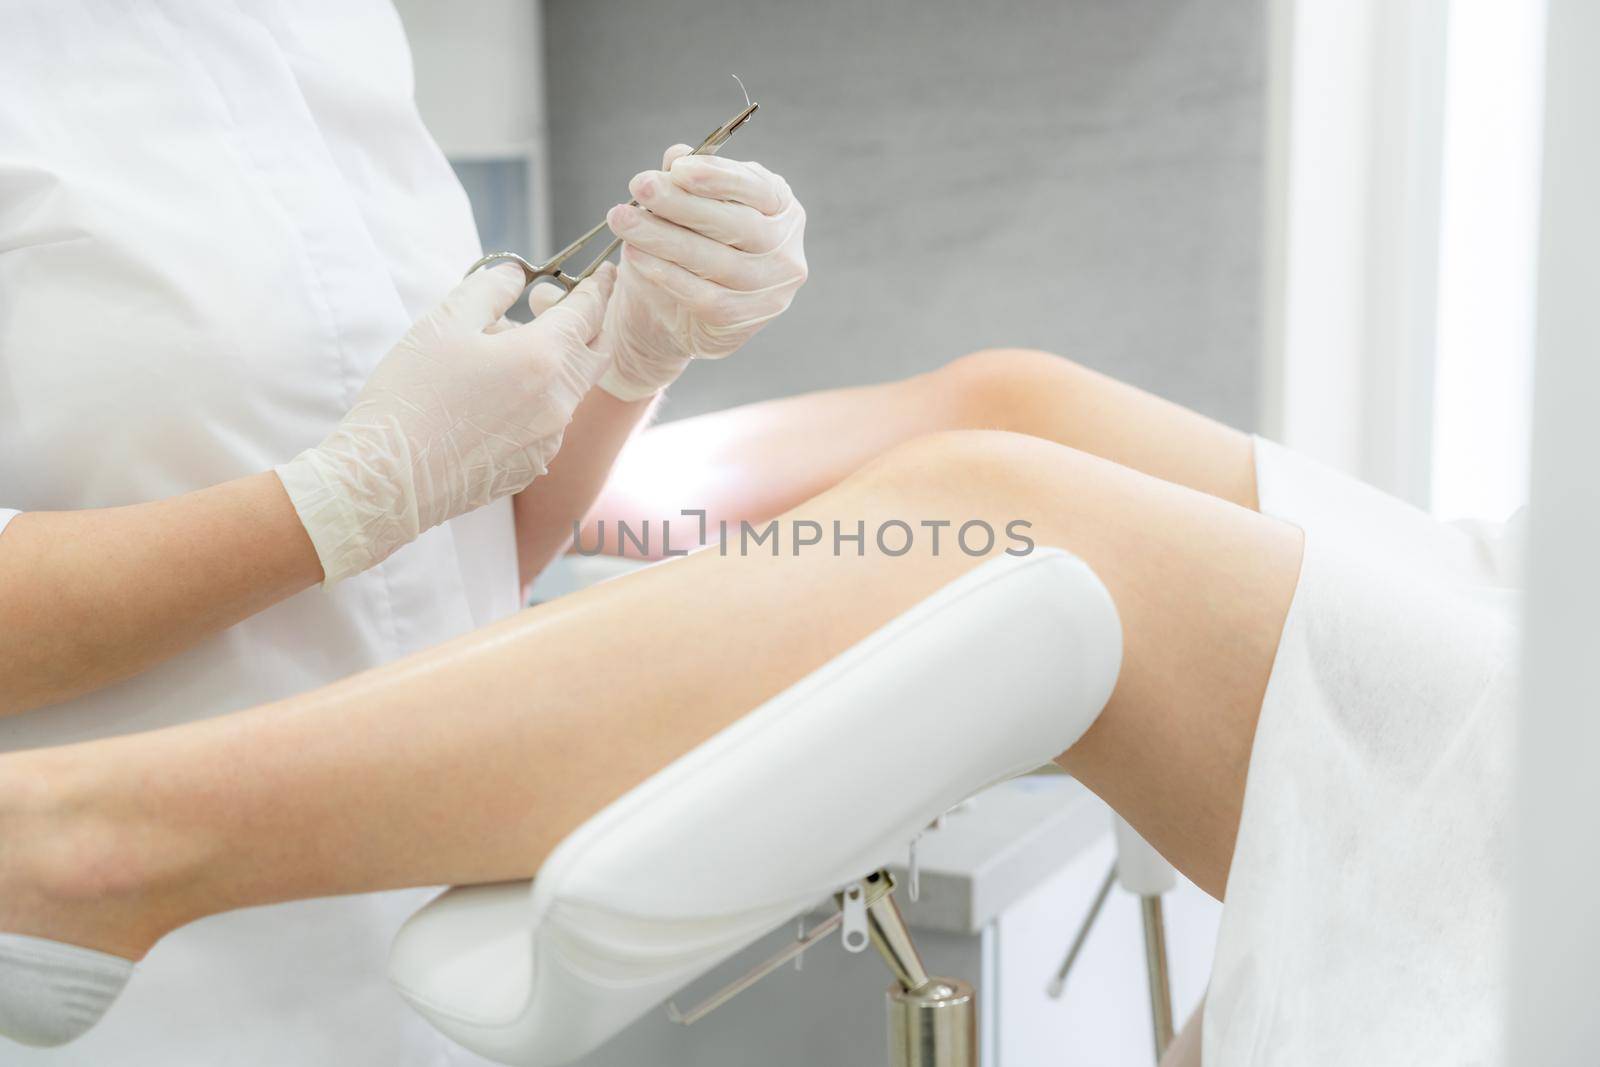 Gynecologist holding needle for stitching before patient surgery